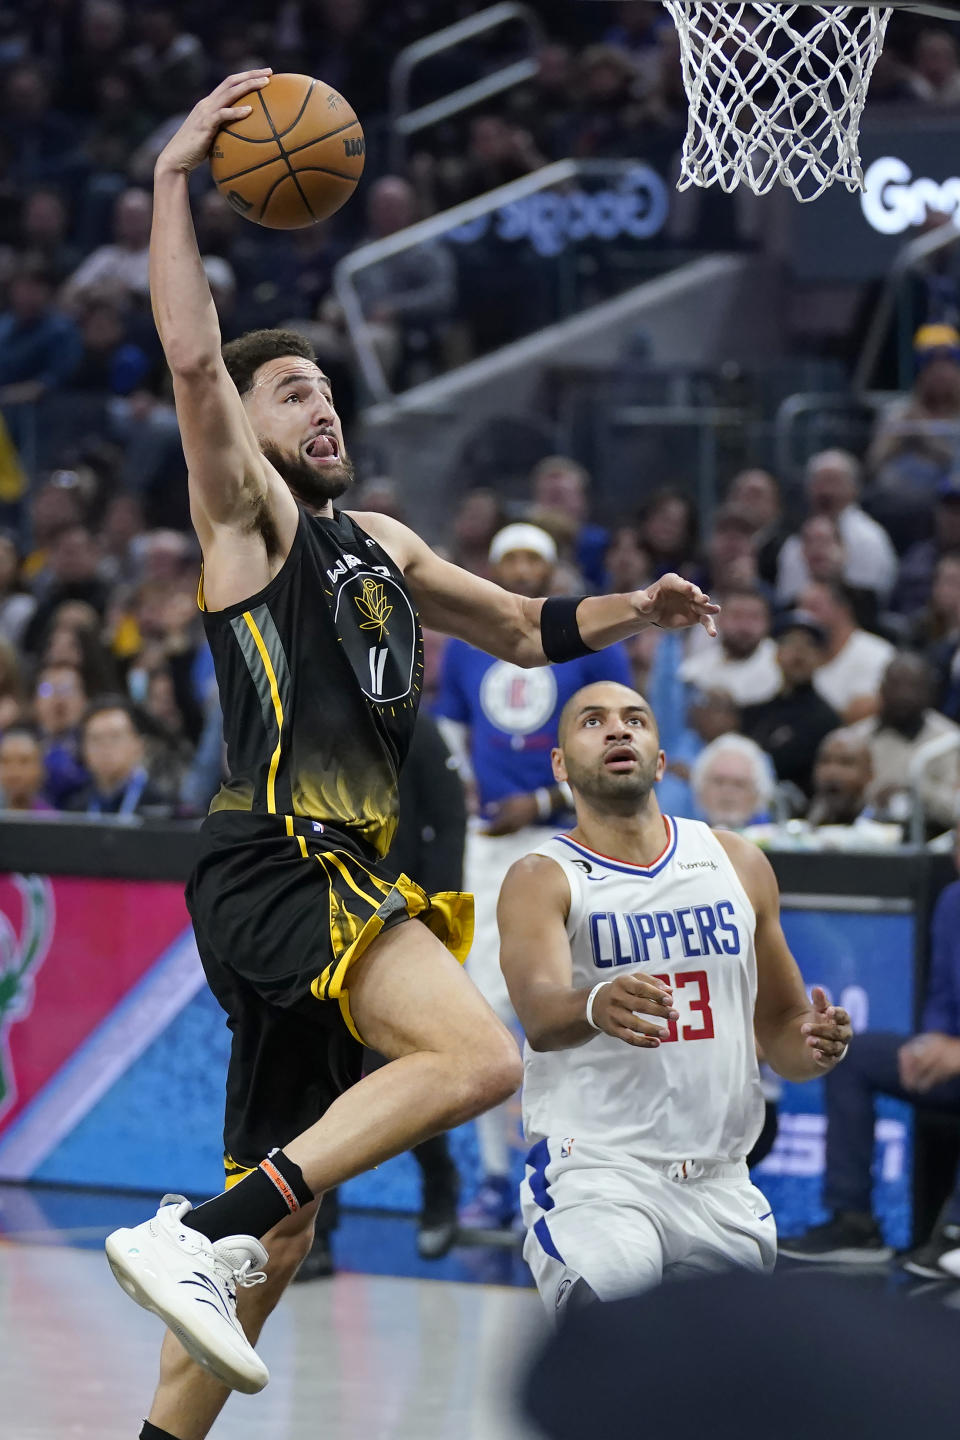 Golden State Warriors guard Klay Thompson (11) dunks in front of Los Angeles Clippers forward Nicolas Batum (33) during the first half of an NBA basketball game in San Francisco, Wednesday, Nov. 23, 2022. (AP Photo/Jeff Chiu)